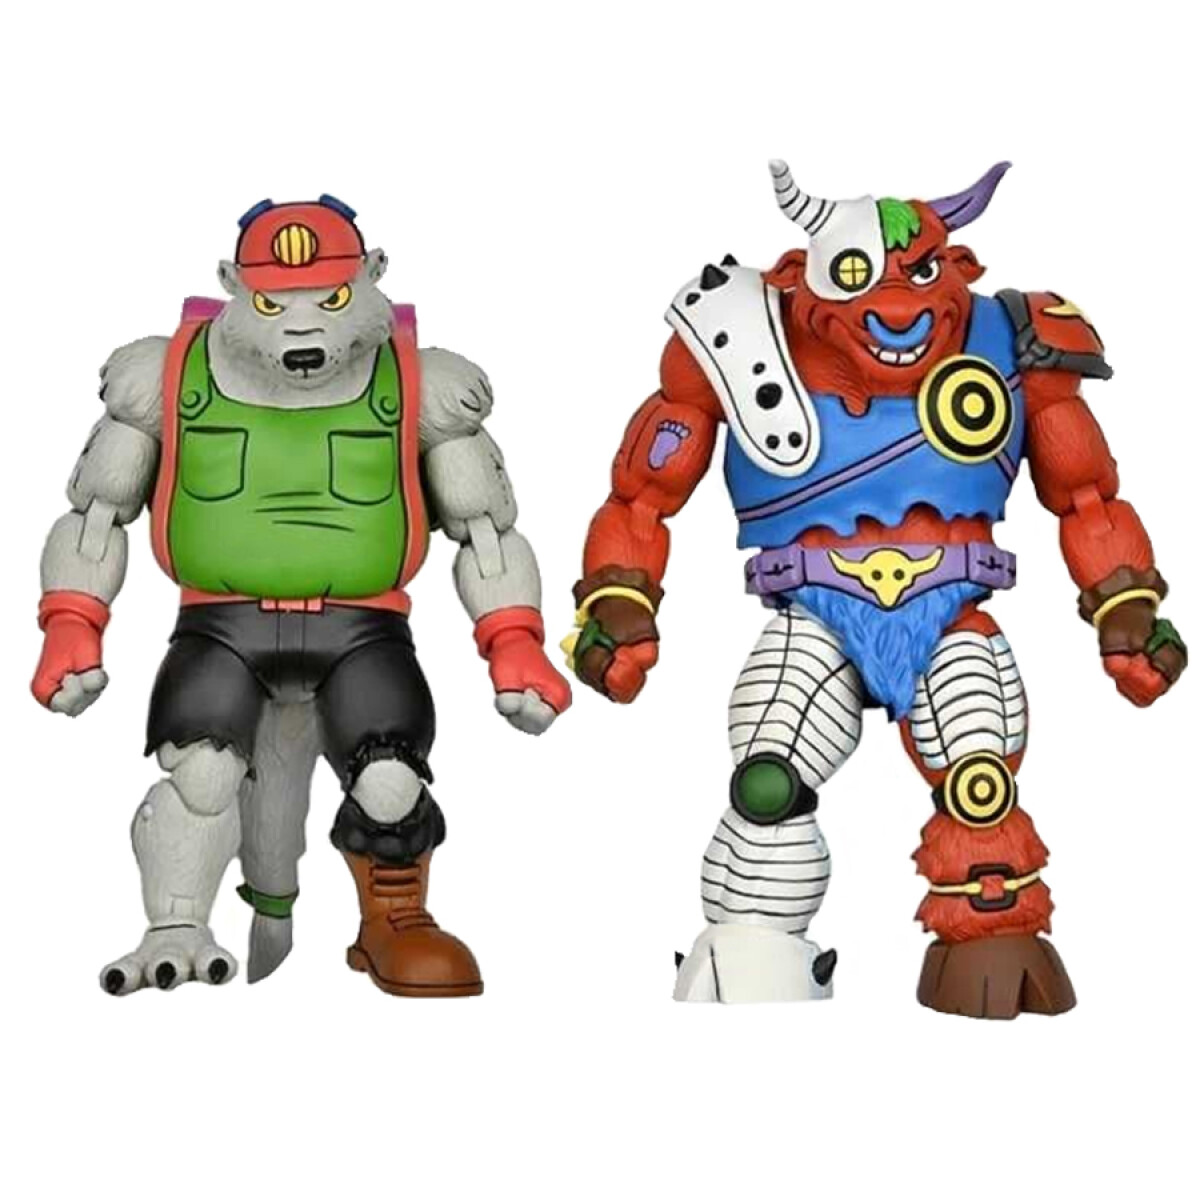 TMNT - Dirtbag and Groundchuck 7" Scale Figure 